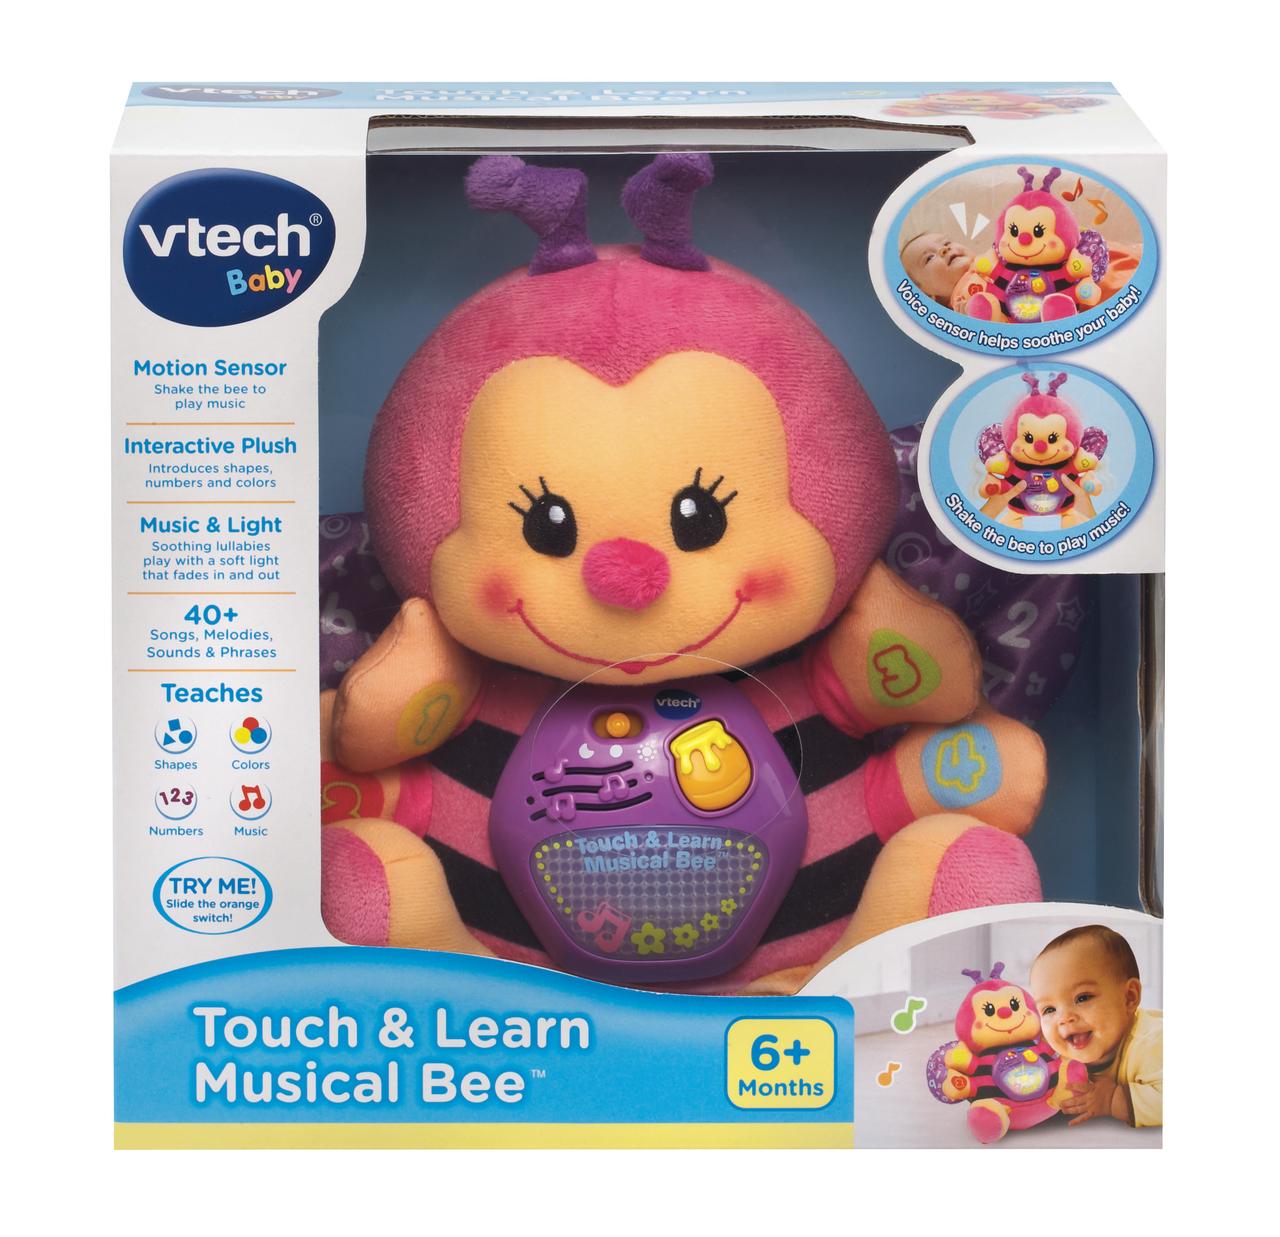 VTech Touch and Learn Musical Bee, Plush Crib Baby Toy, Pink, Walmart Exclusive - image 5 of 5